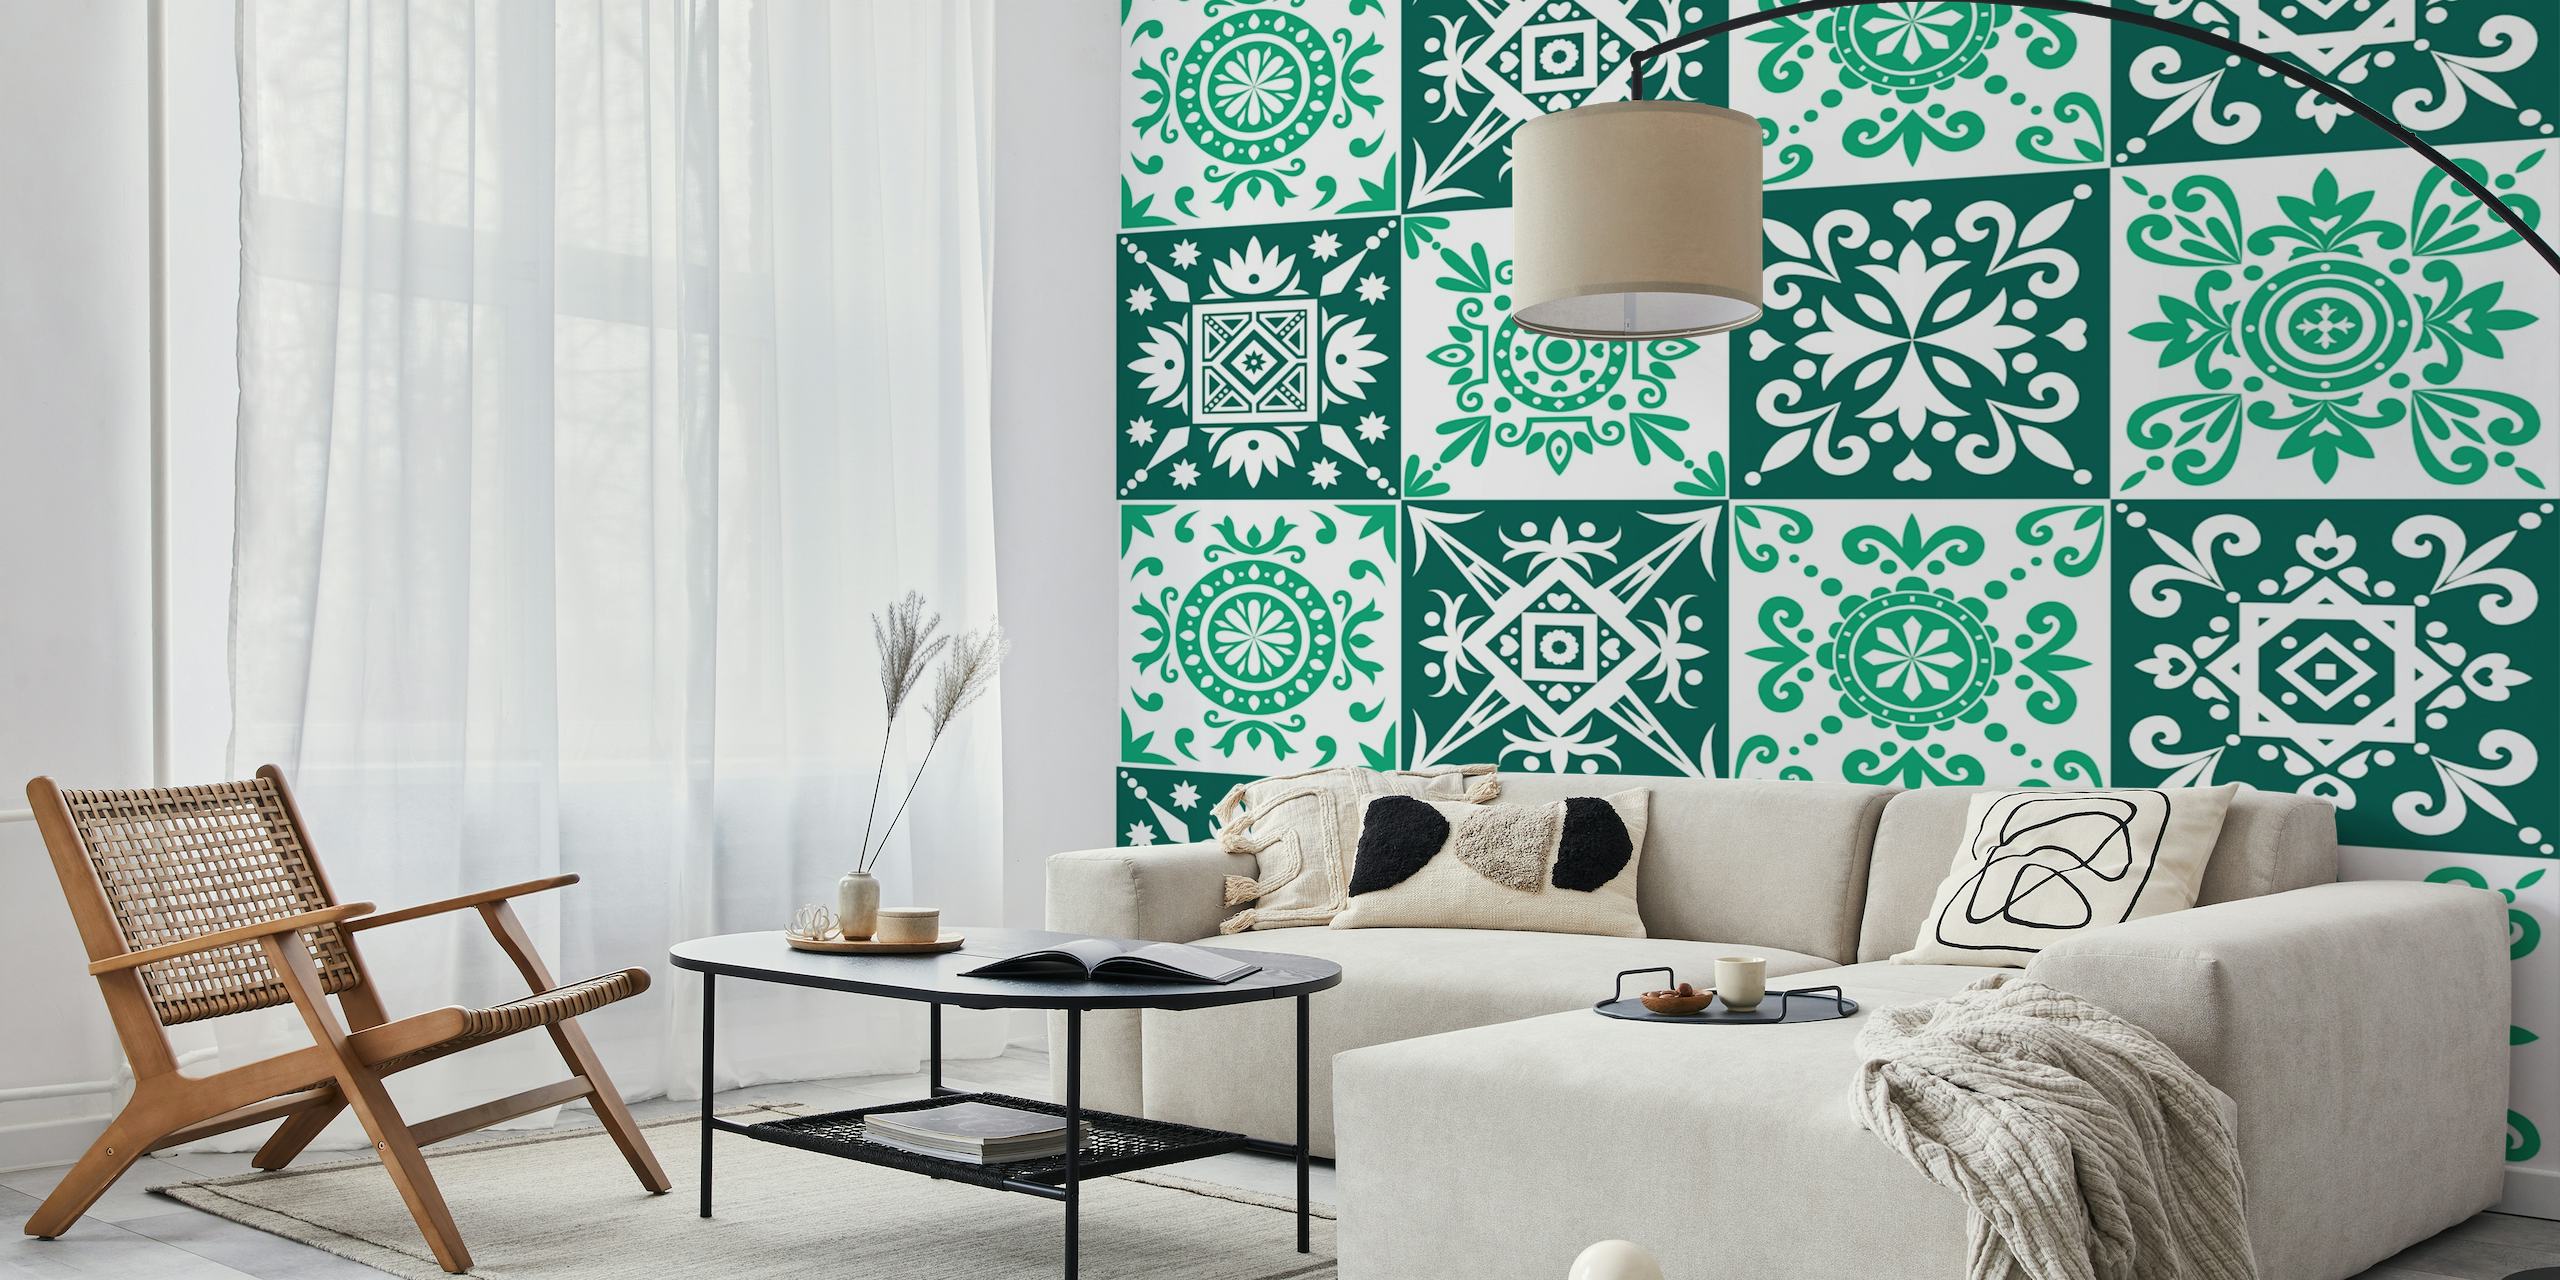 Spanish tile in jungle and emerald behang